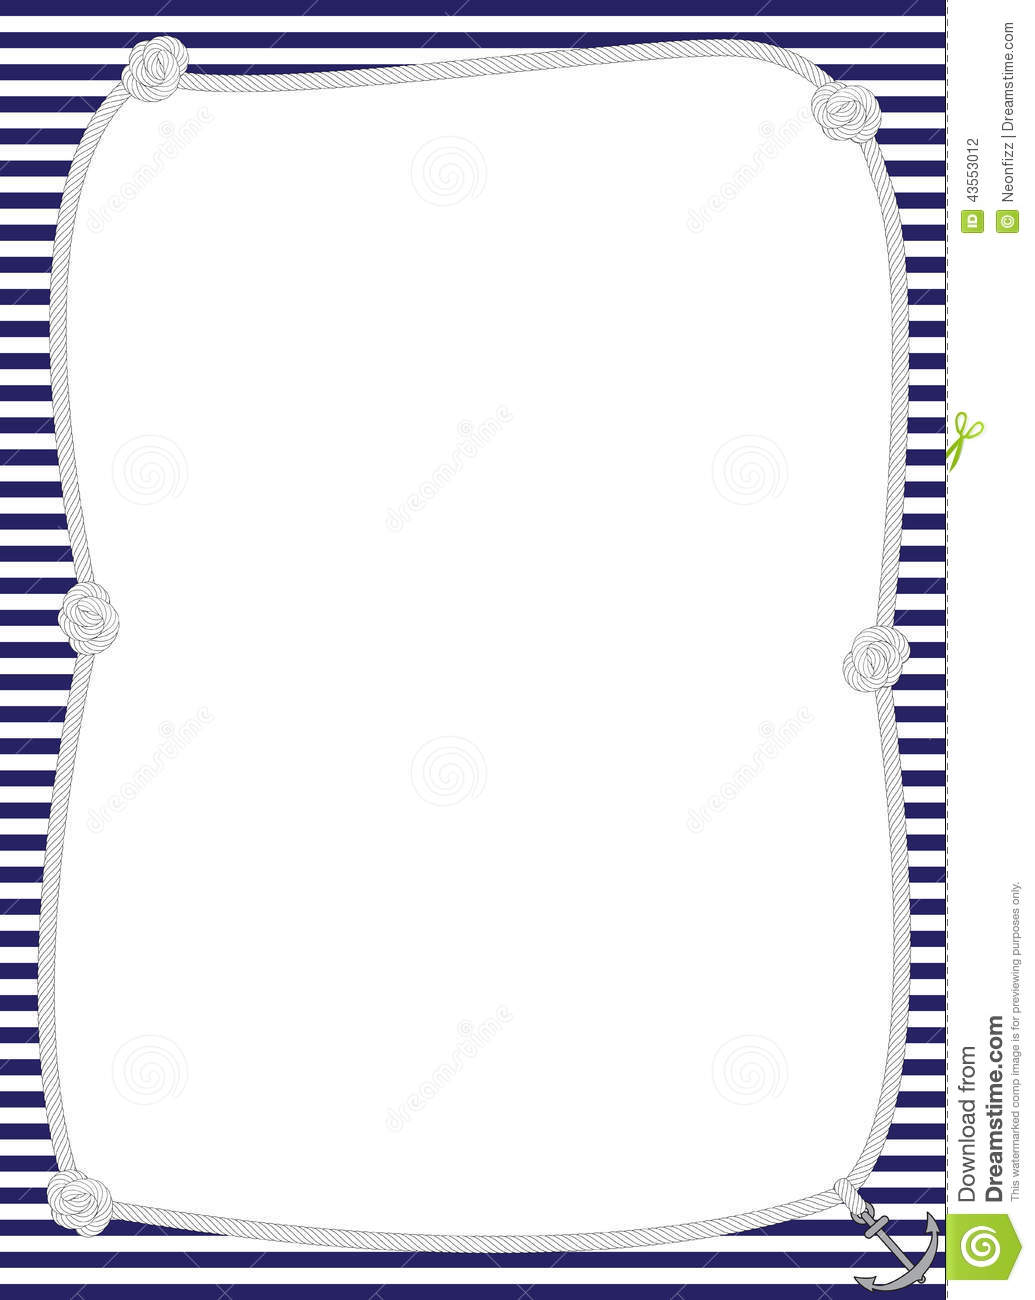 Rope Border With Navy Striped Background For Nautical Themed Designs